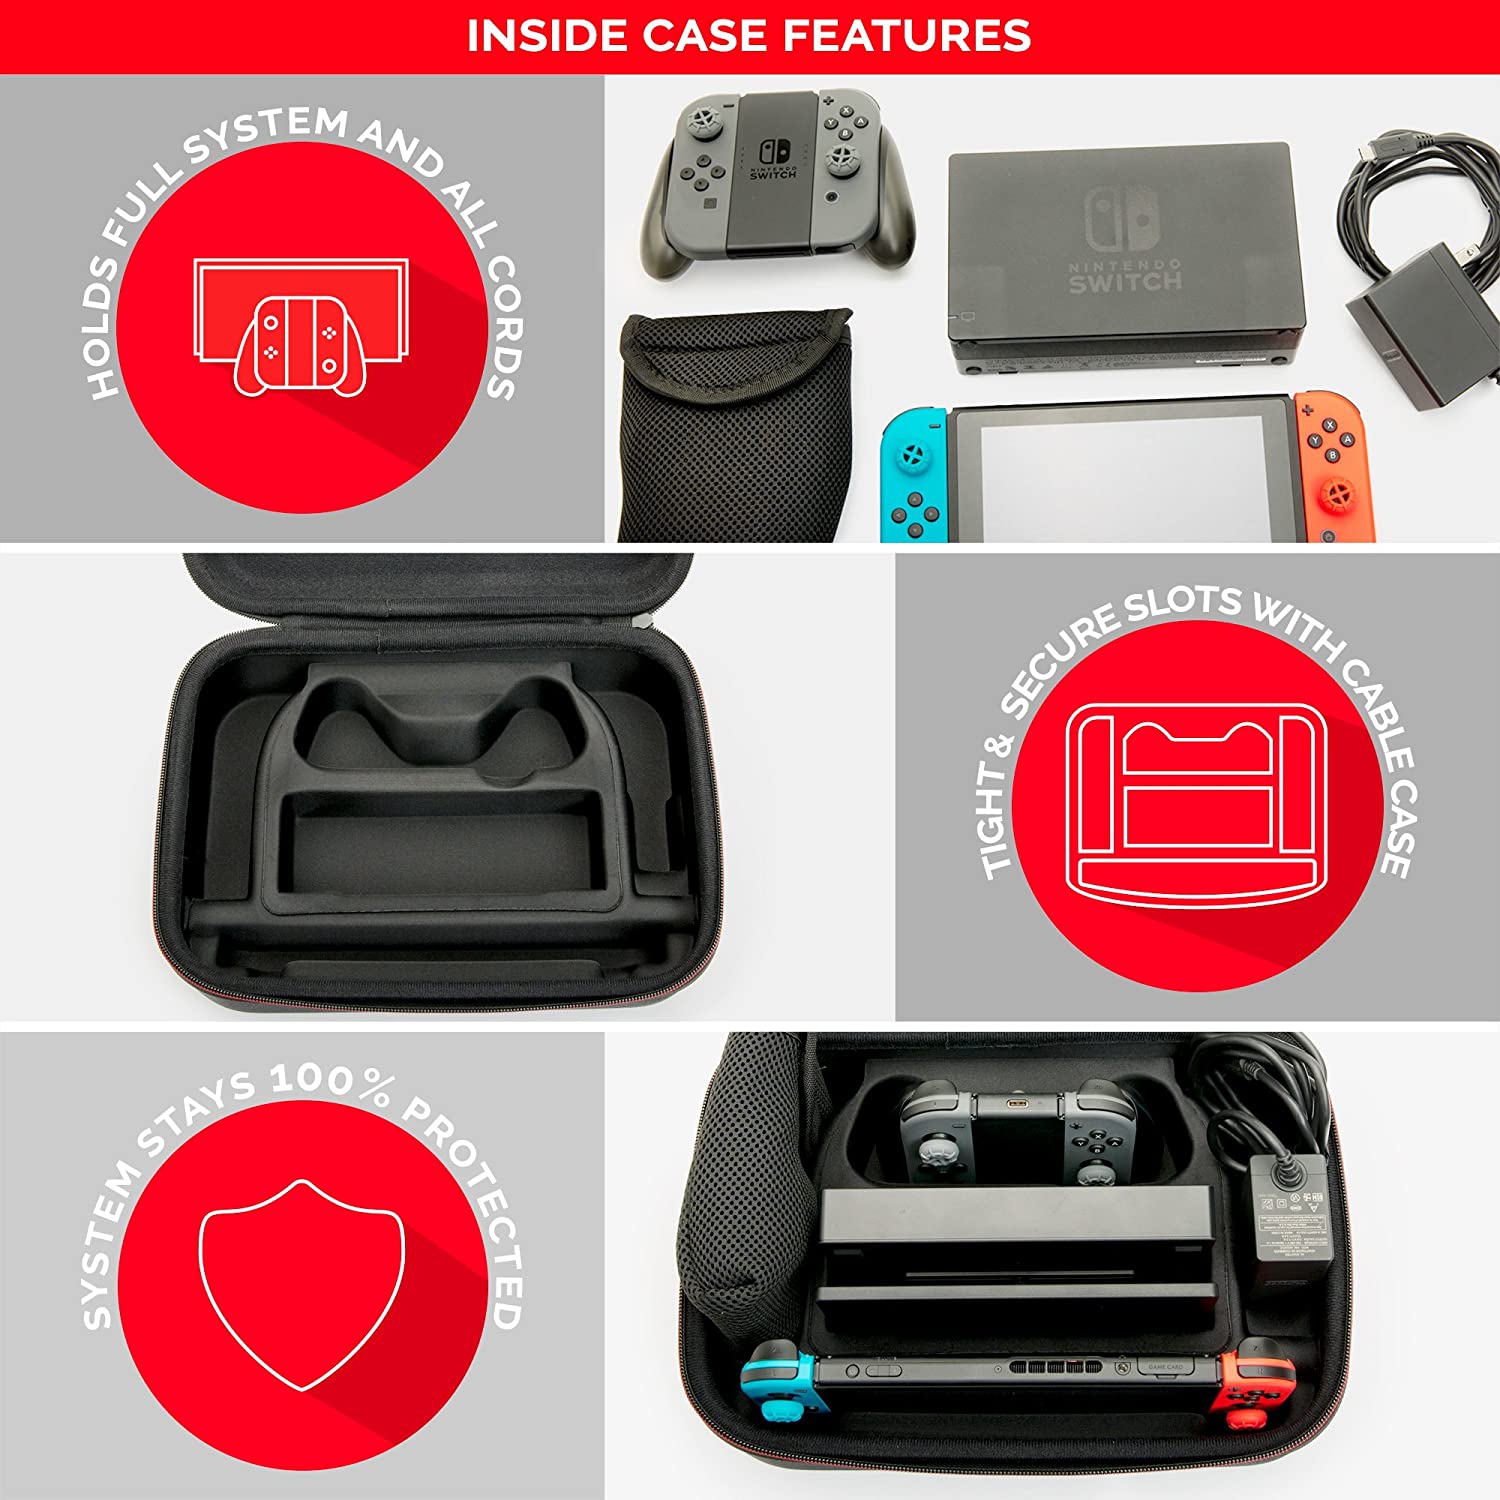 Nintendo Switch / OLED Switch System Carrying Case – Protective Deluxe  Travel System Case – Black Ballistic Nylon Exterior – Official Nintendo 